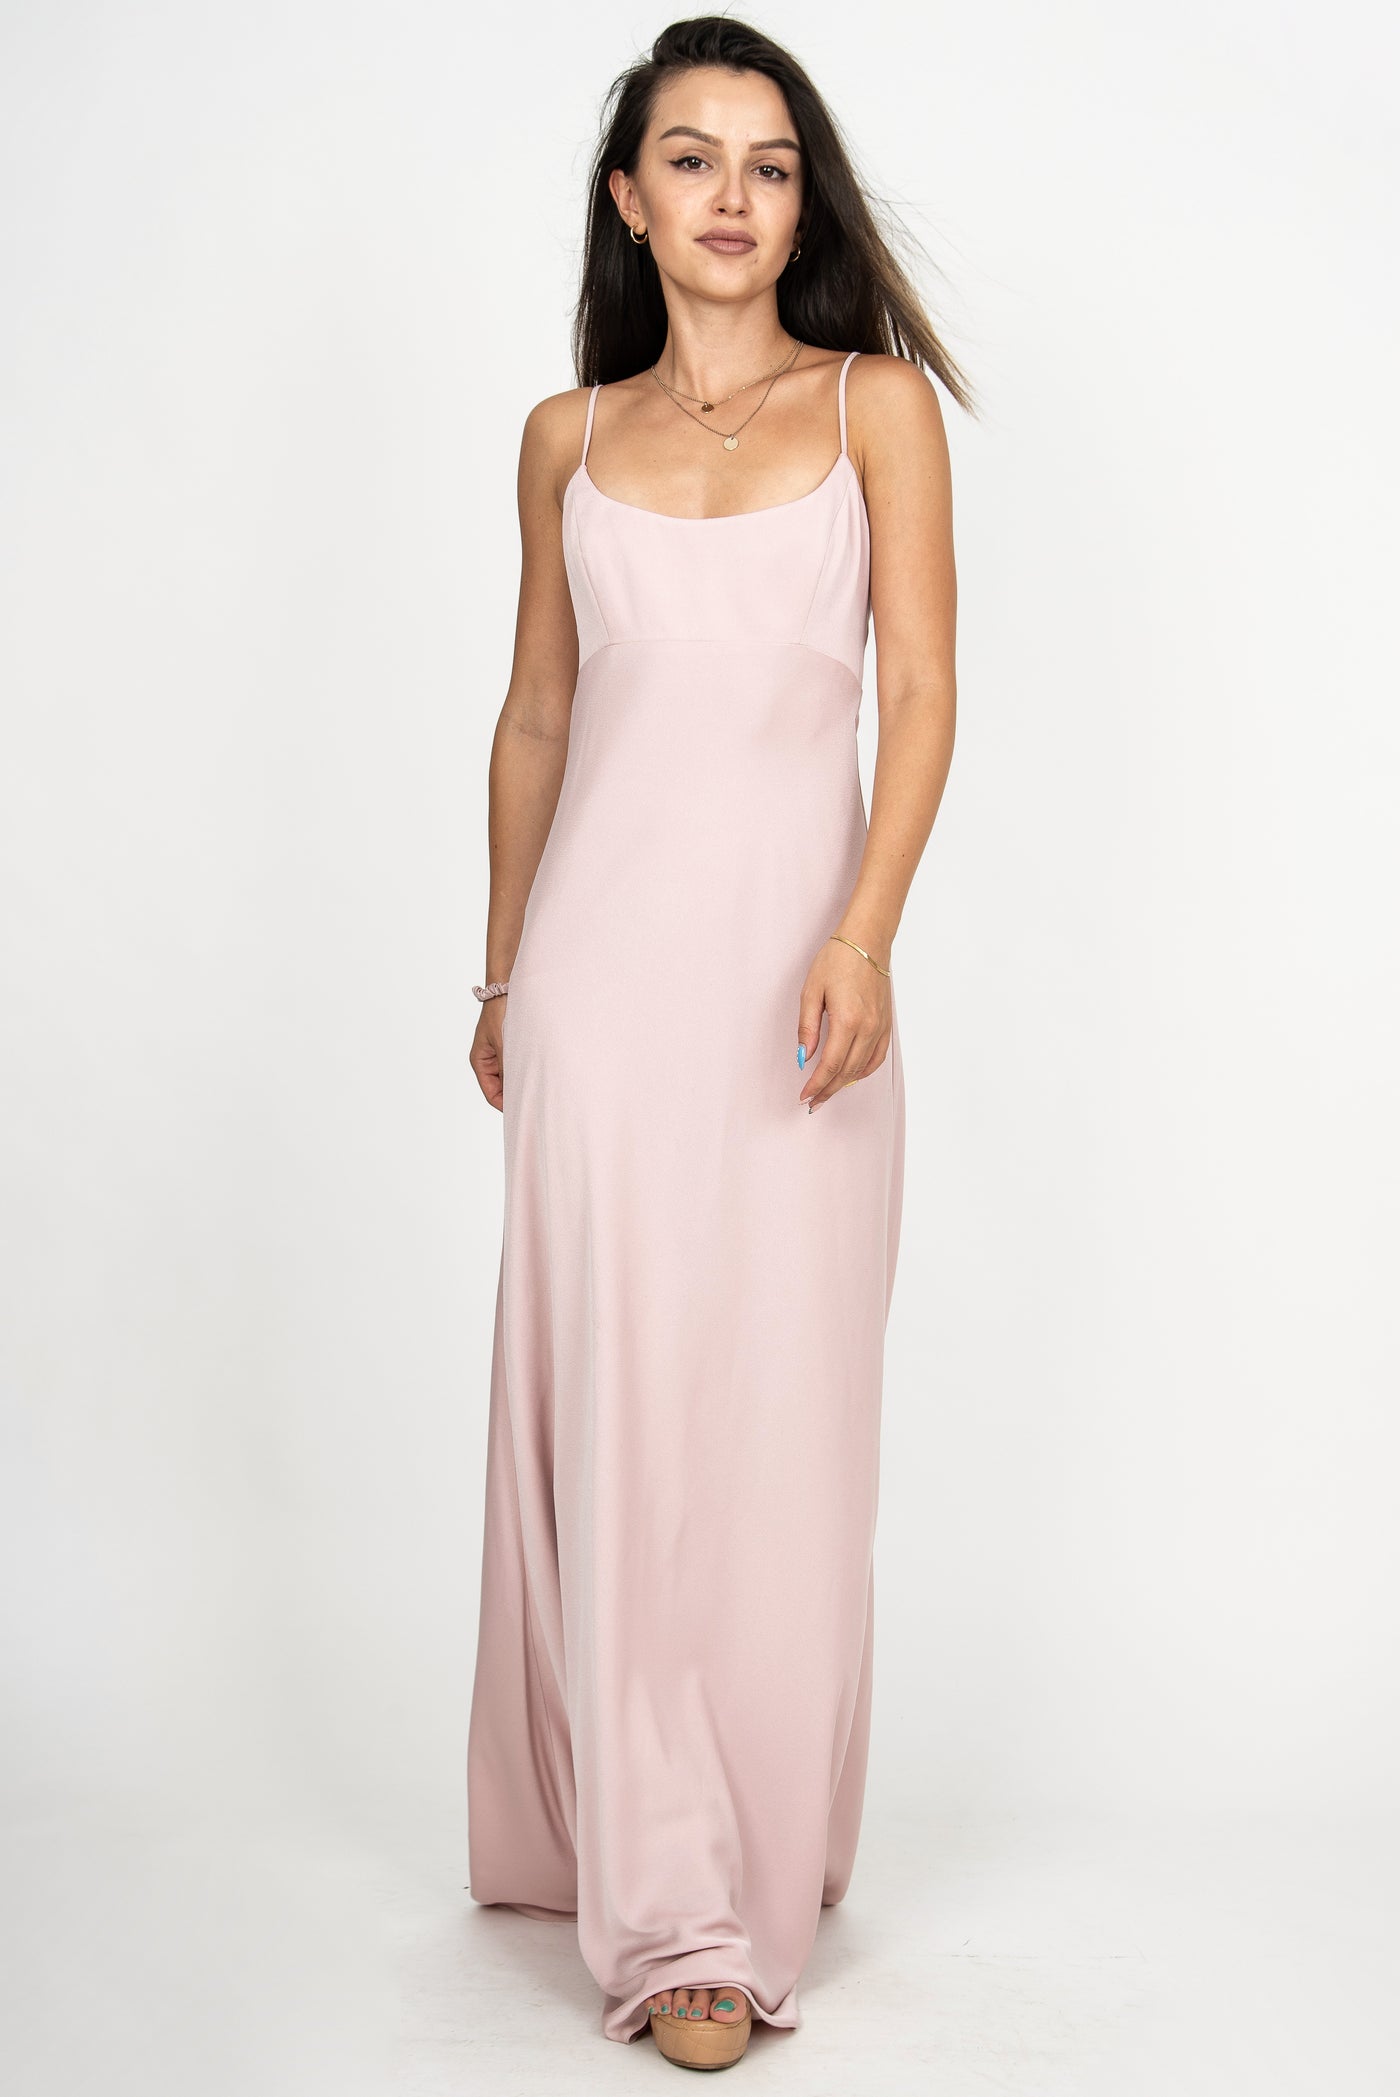 Elegant flowing dress with open back F2325